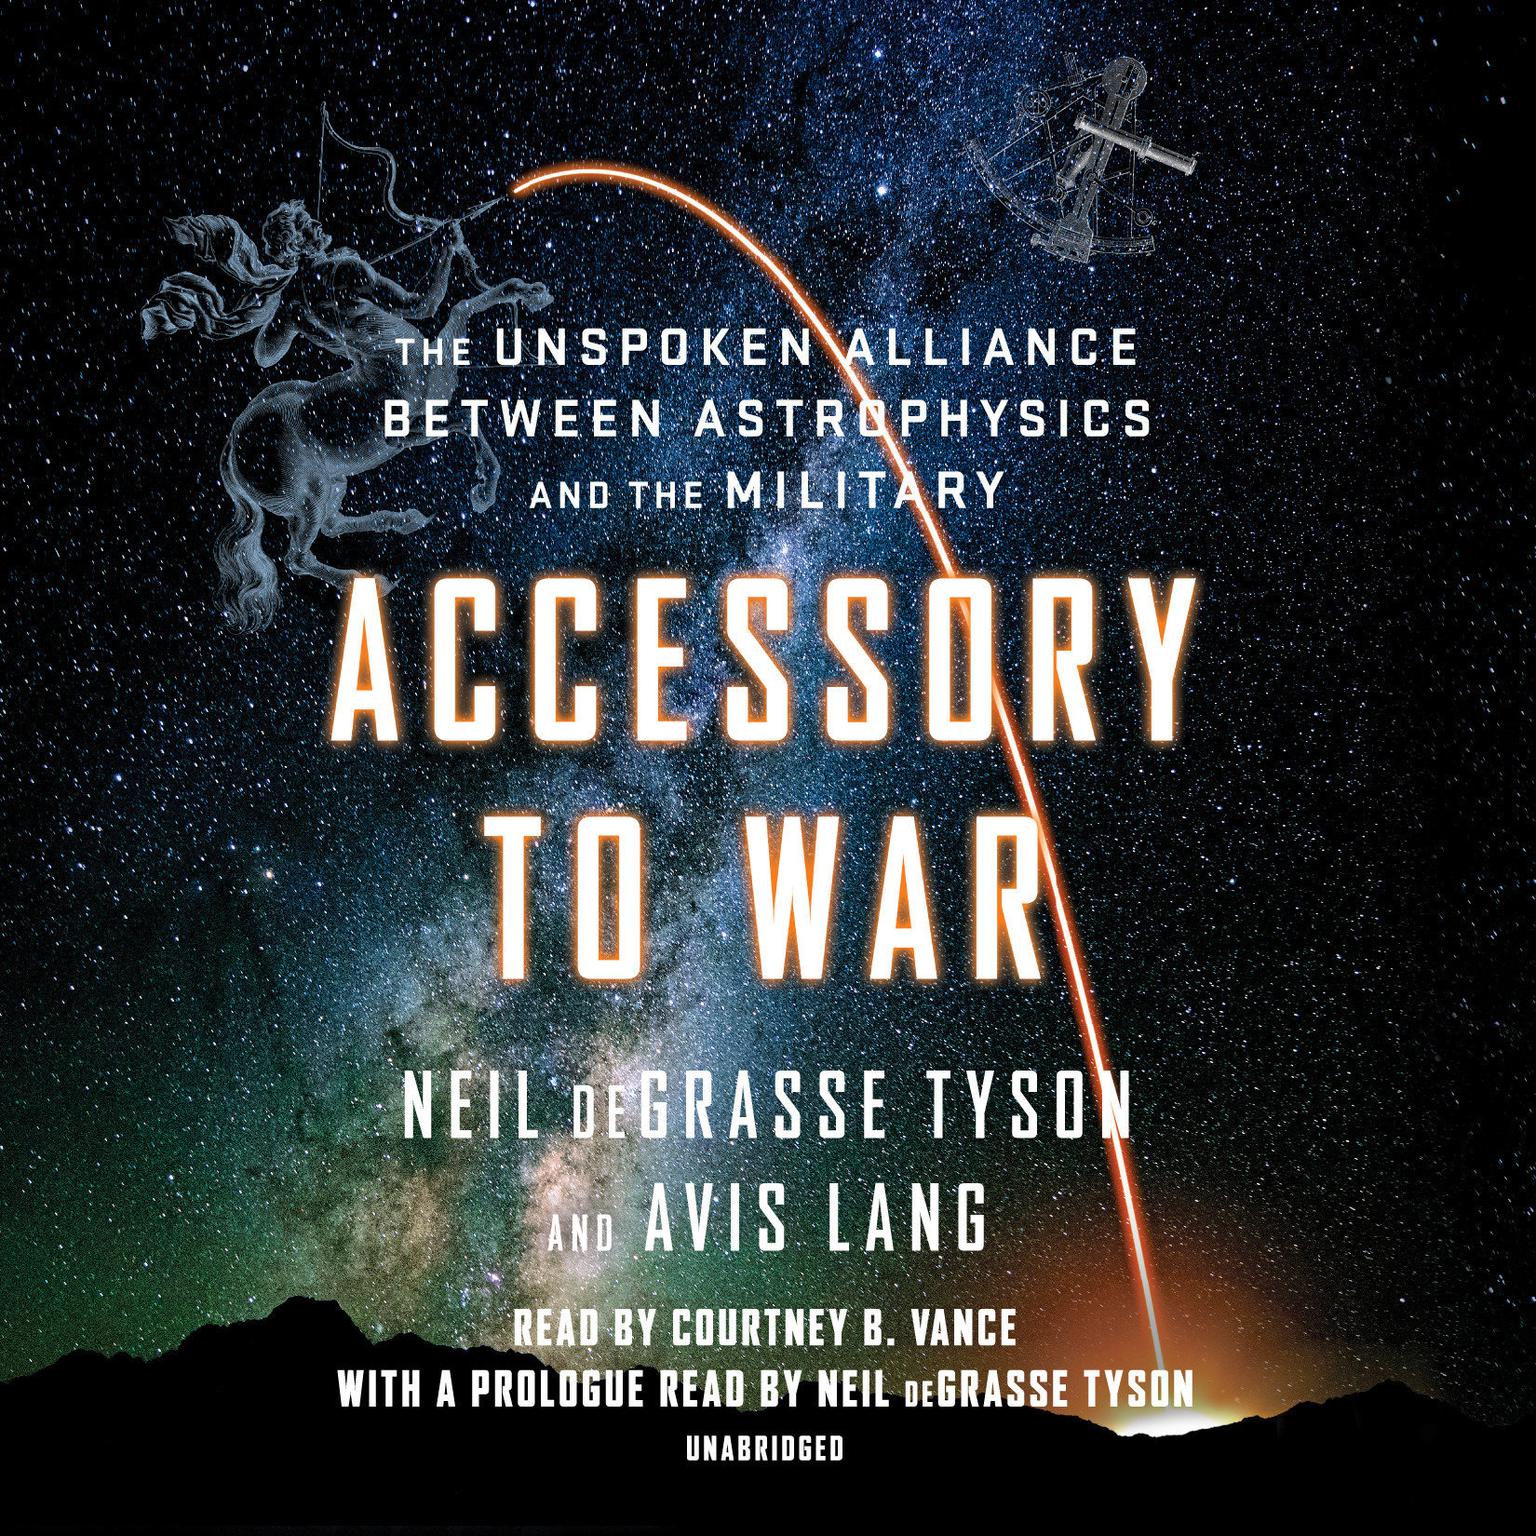 Accessory to War: The Unspoken Alliance Between Astrophysics and the Military Audiobook, by Neil deGrasse Tyson